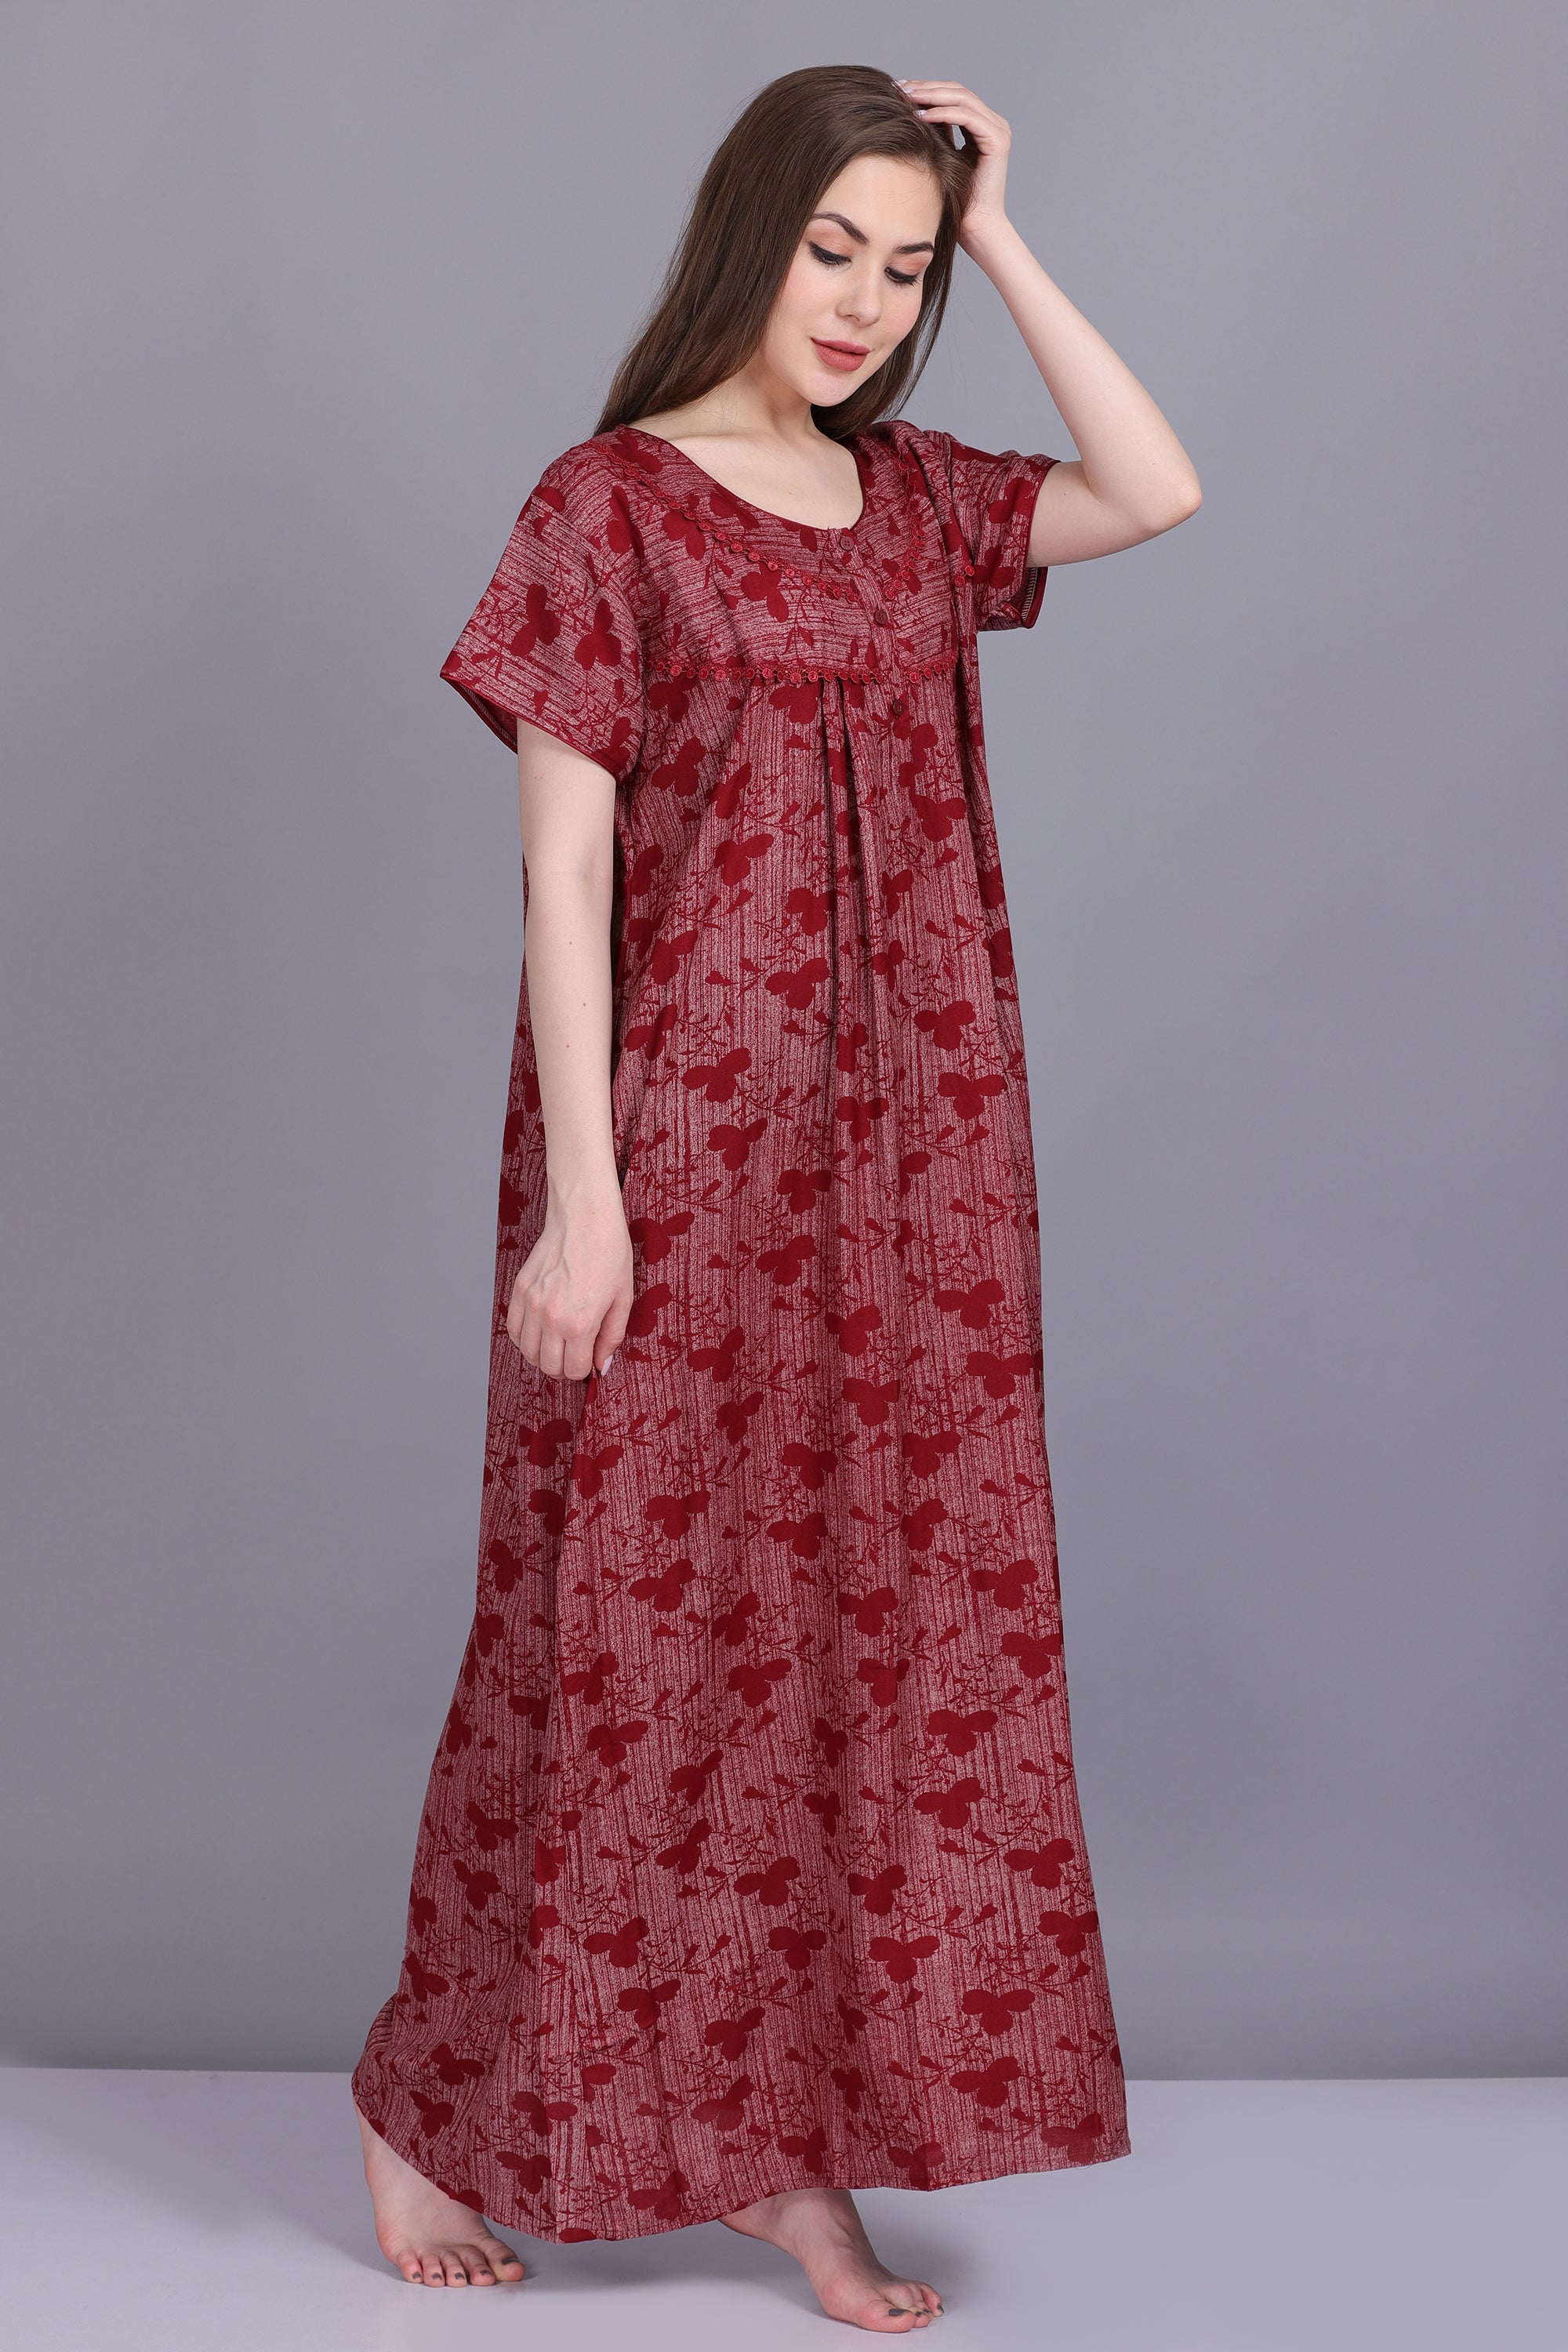 Printed Robe & plain nighty Nightgown set - Private Lives